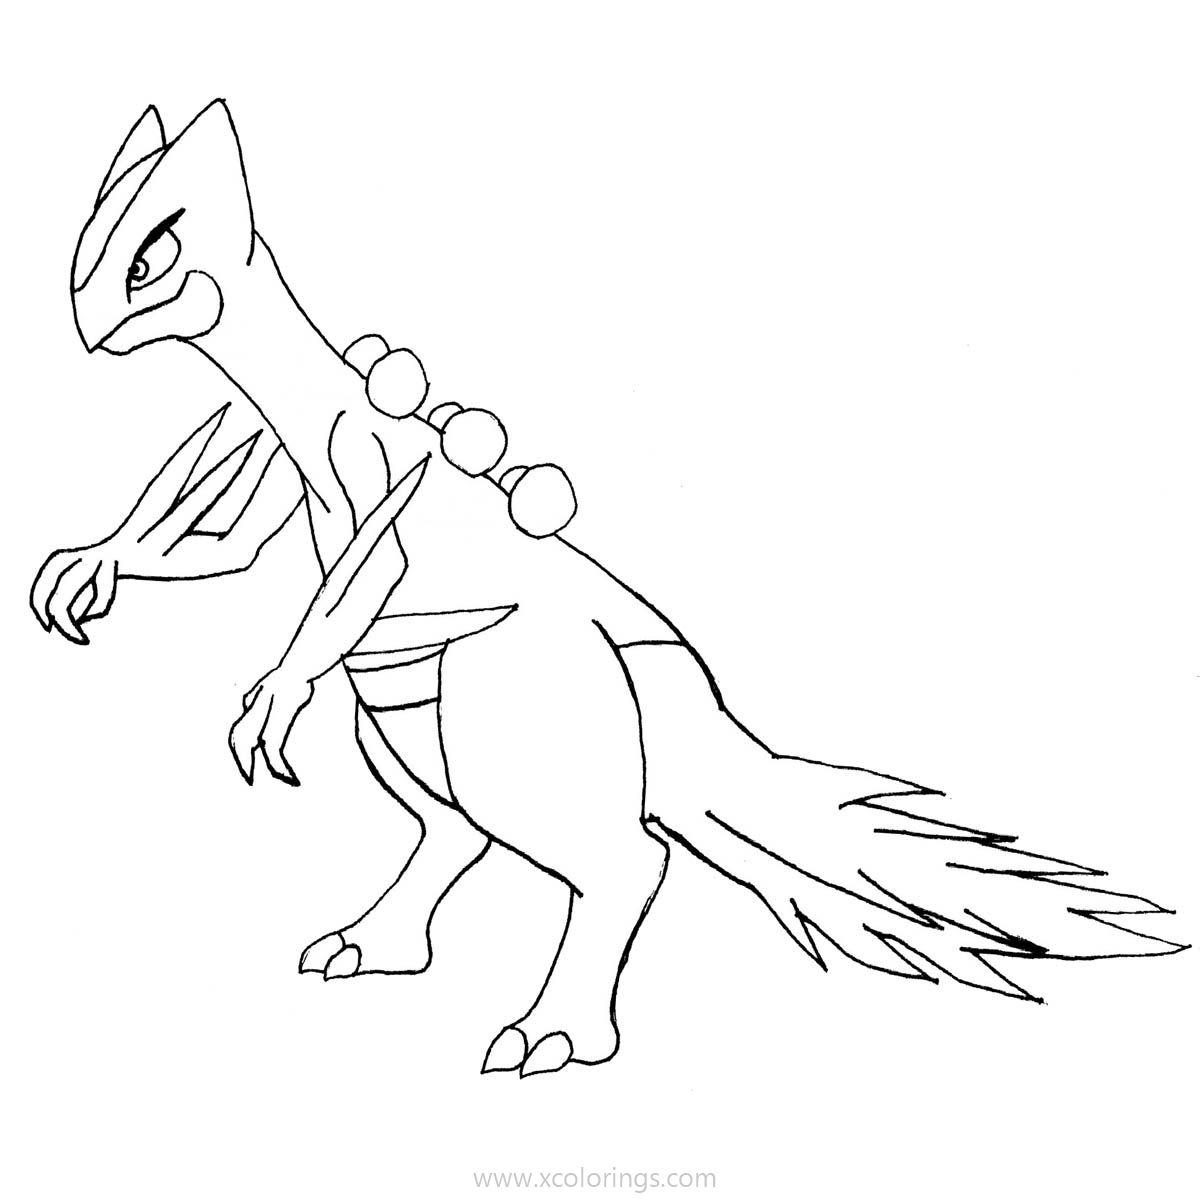 Sceptile Pokemon Coloring Pages Printable - XColorings.com